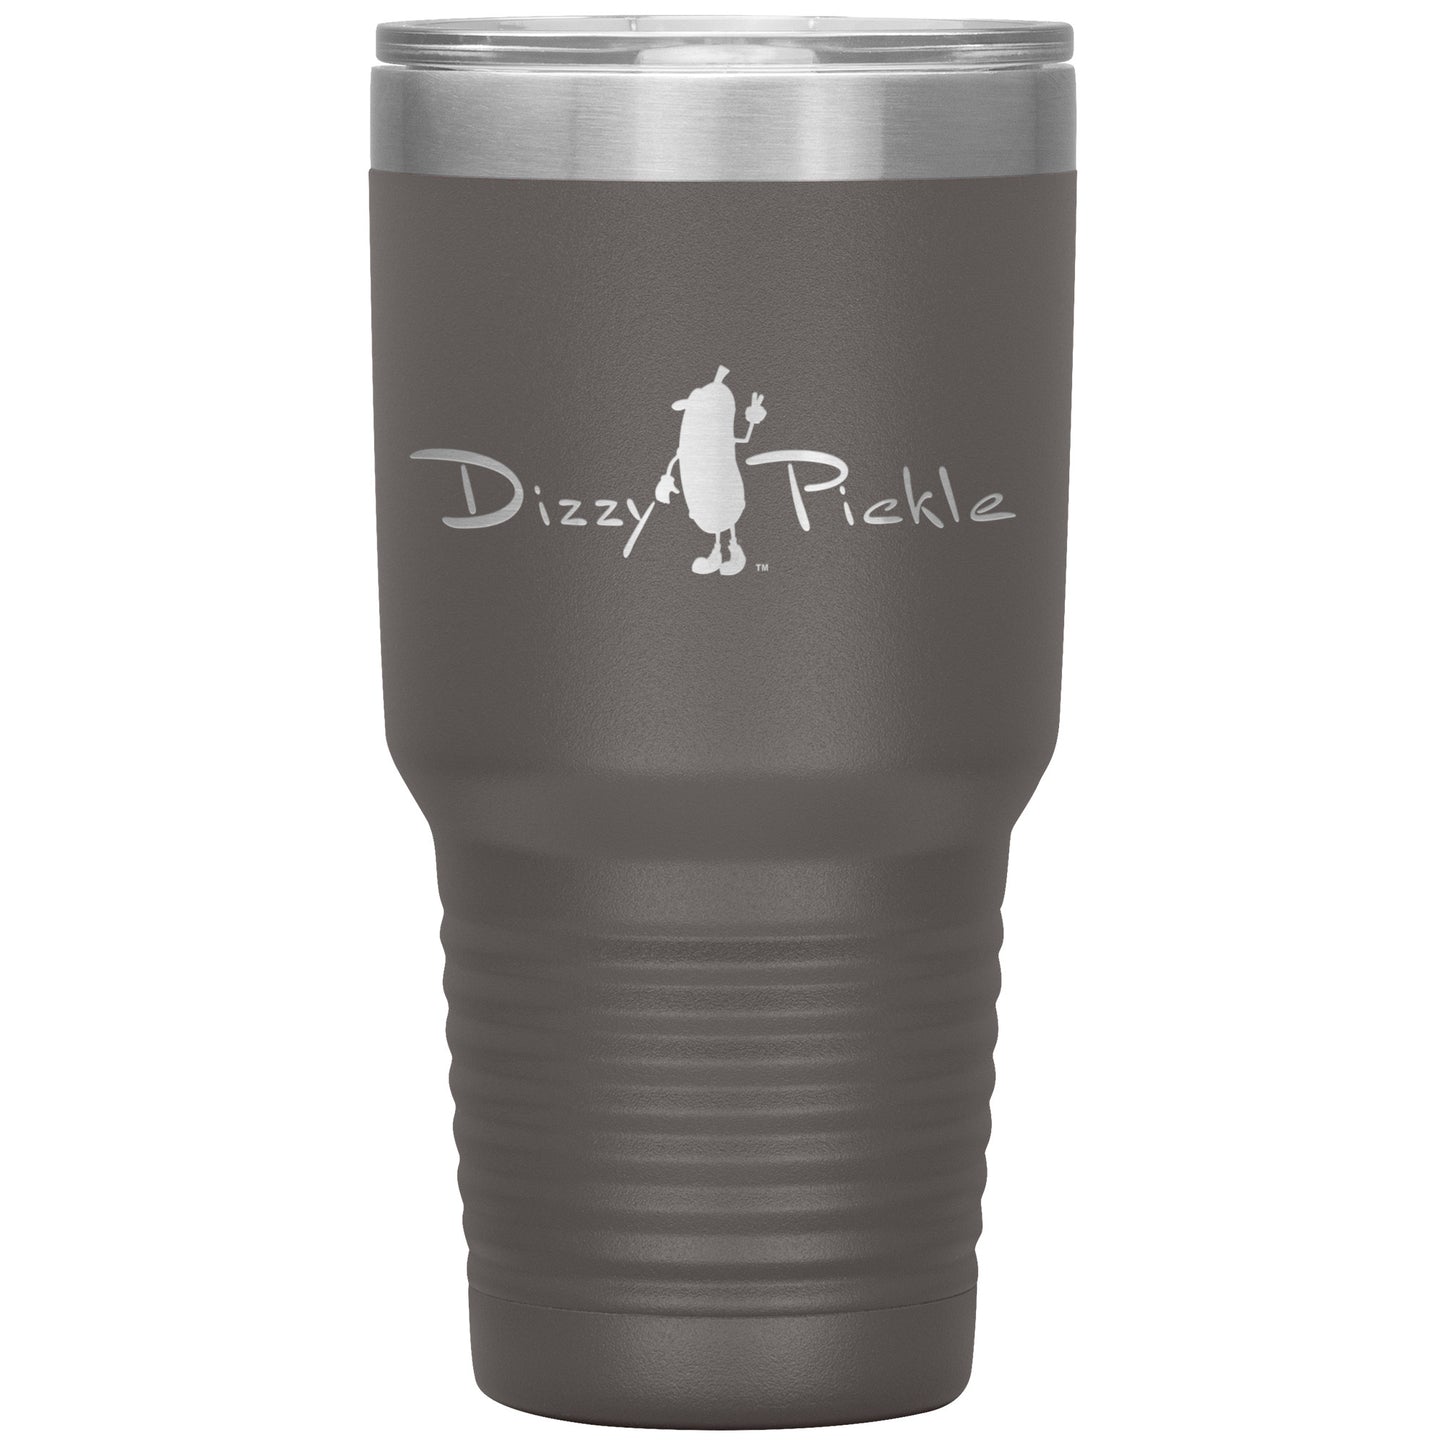 DZY P Classic - 30oz Insulated Tumbler by Dizzy Pickle